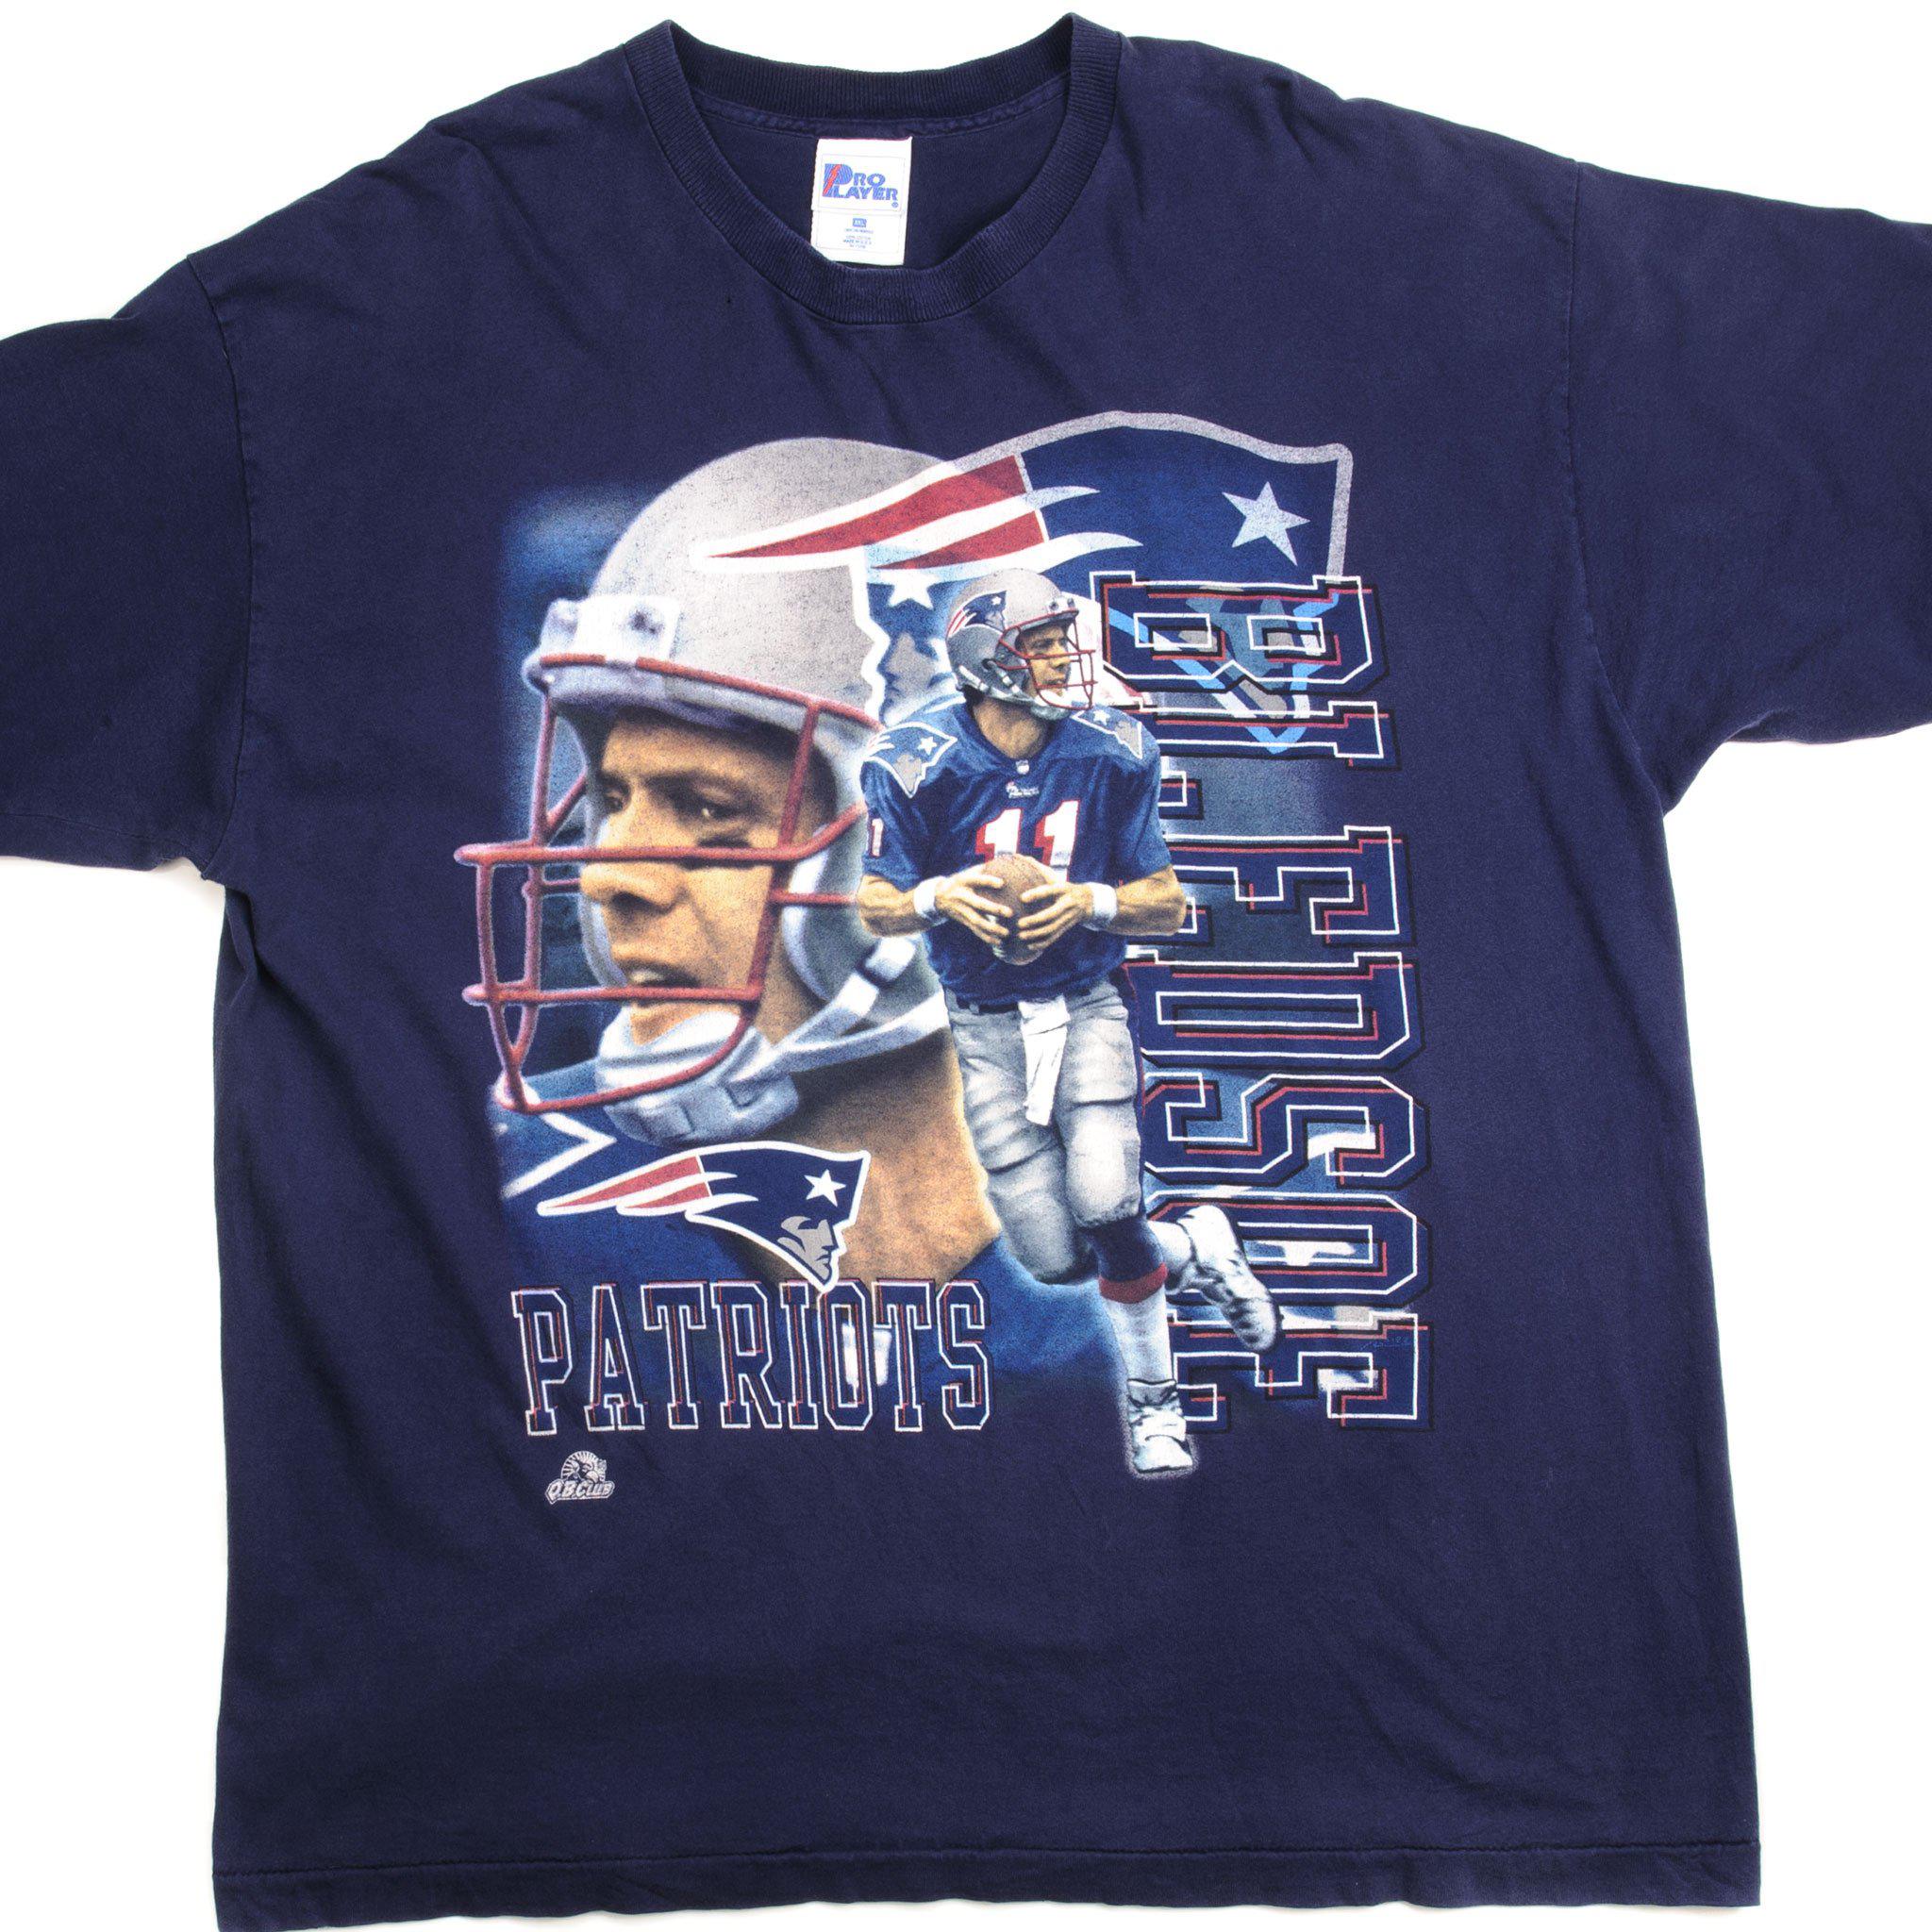 Sports / College Vintage NFL New England Patriots Drew Bledsoe Tee Shirt Size 2XL Made in USA